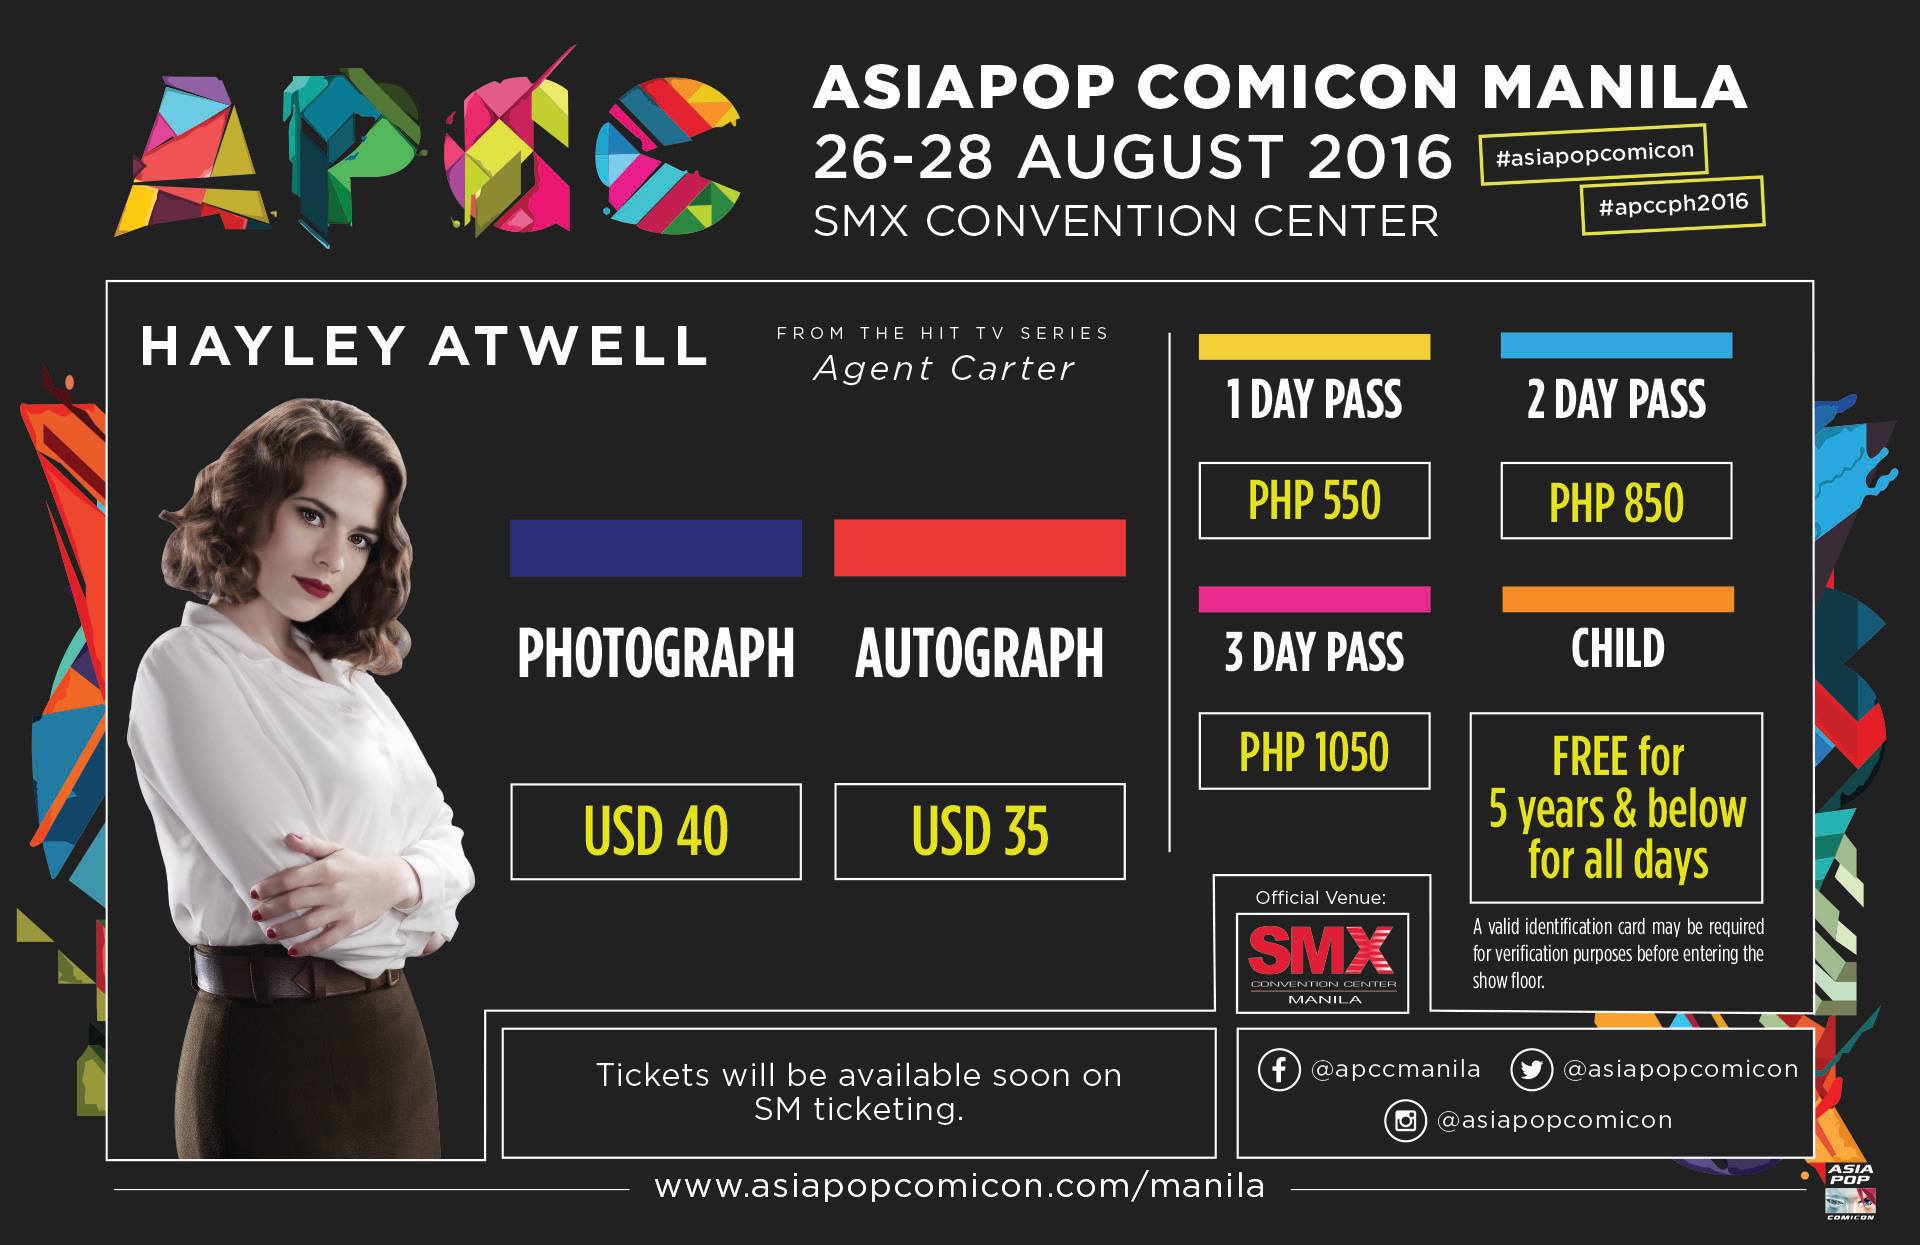 AsiaPOP Comicon Manila Page Liked · July 18 · Edited · Ticket prices for AsiaPOP Comicon Manila 2016 are out and we couldn't be more excited! Don't miss the chance to meet Agent Carter herself, Hayley Atwell, and other pop culture artists and celebrities! Start preparing your hearts (and your wallets)! 😉 #asiapopcomicon #apccph2016 #AgentCarterinManila #HayleyAtwell #AgentCarter #Marvel #PeggyCarter #SHIELD #CaptainAmerica #CivilWar